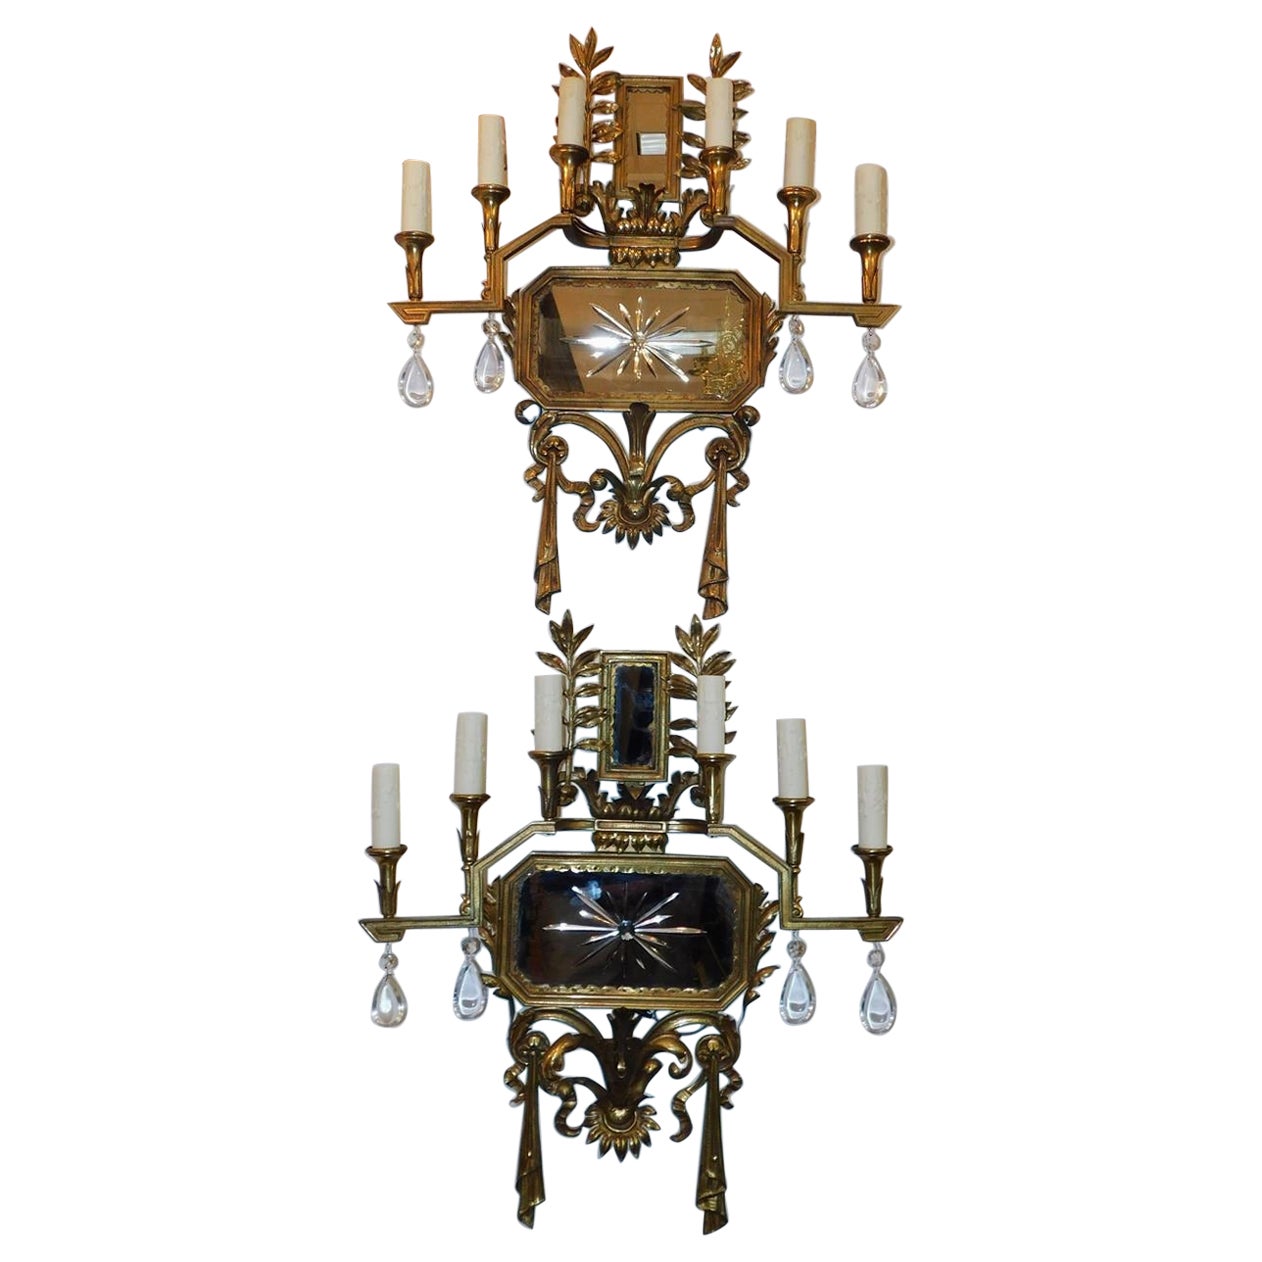 Pair of American Gilt Bronze & Star Mirrored Wall Sconces, Caldwell & Co. C 1870 For Sale